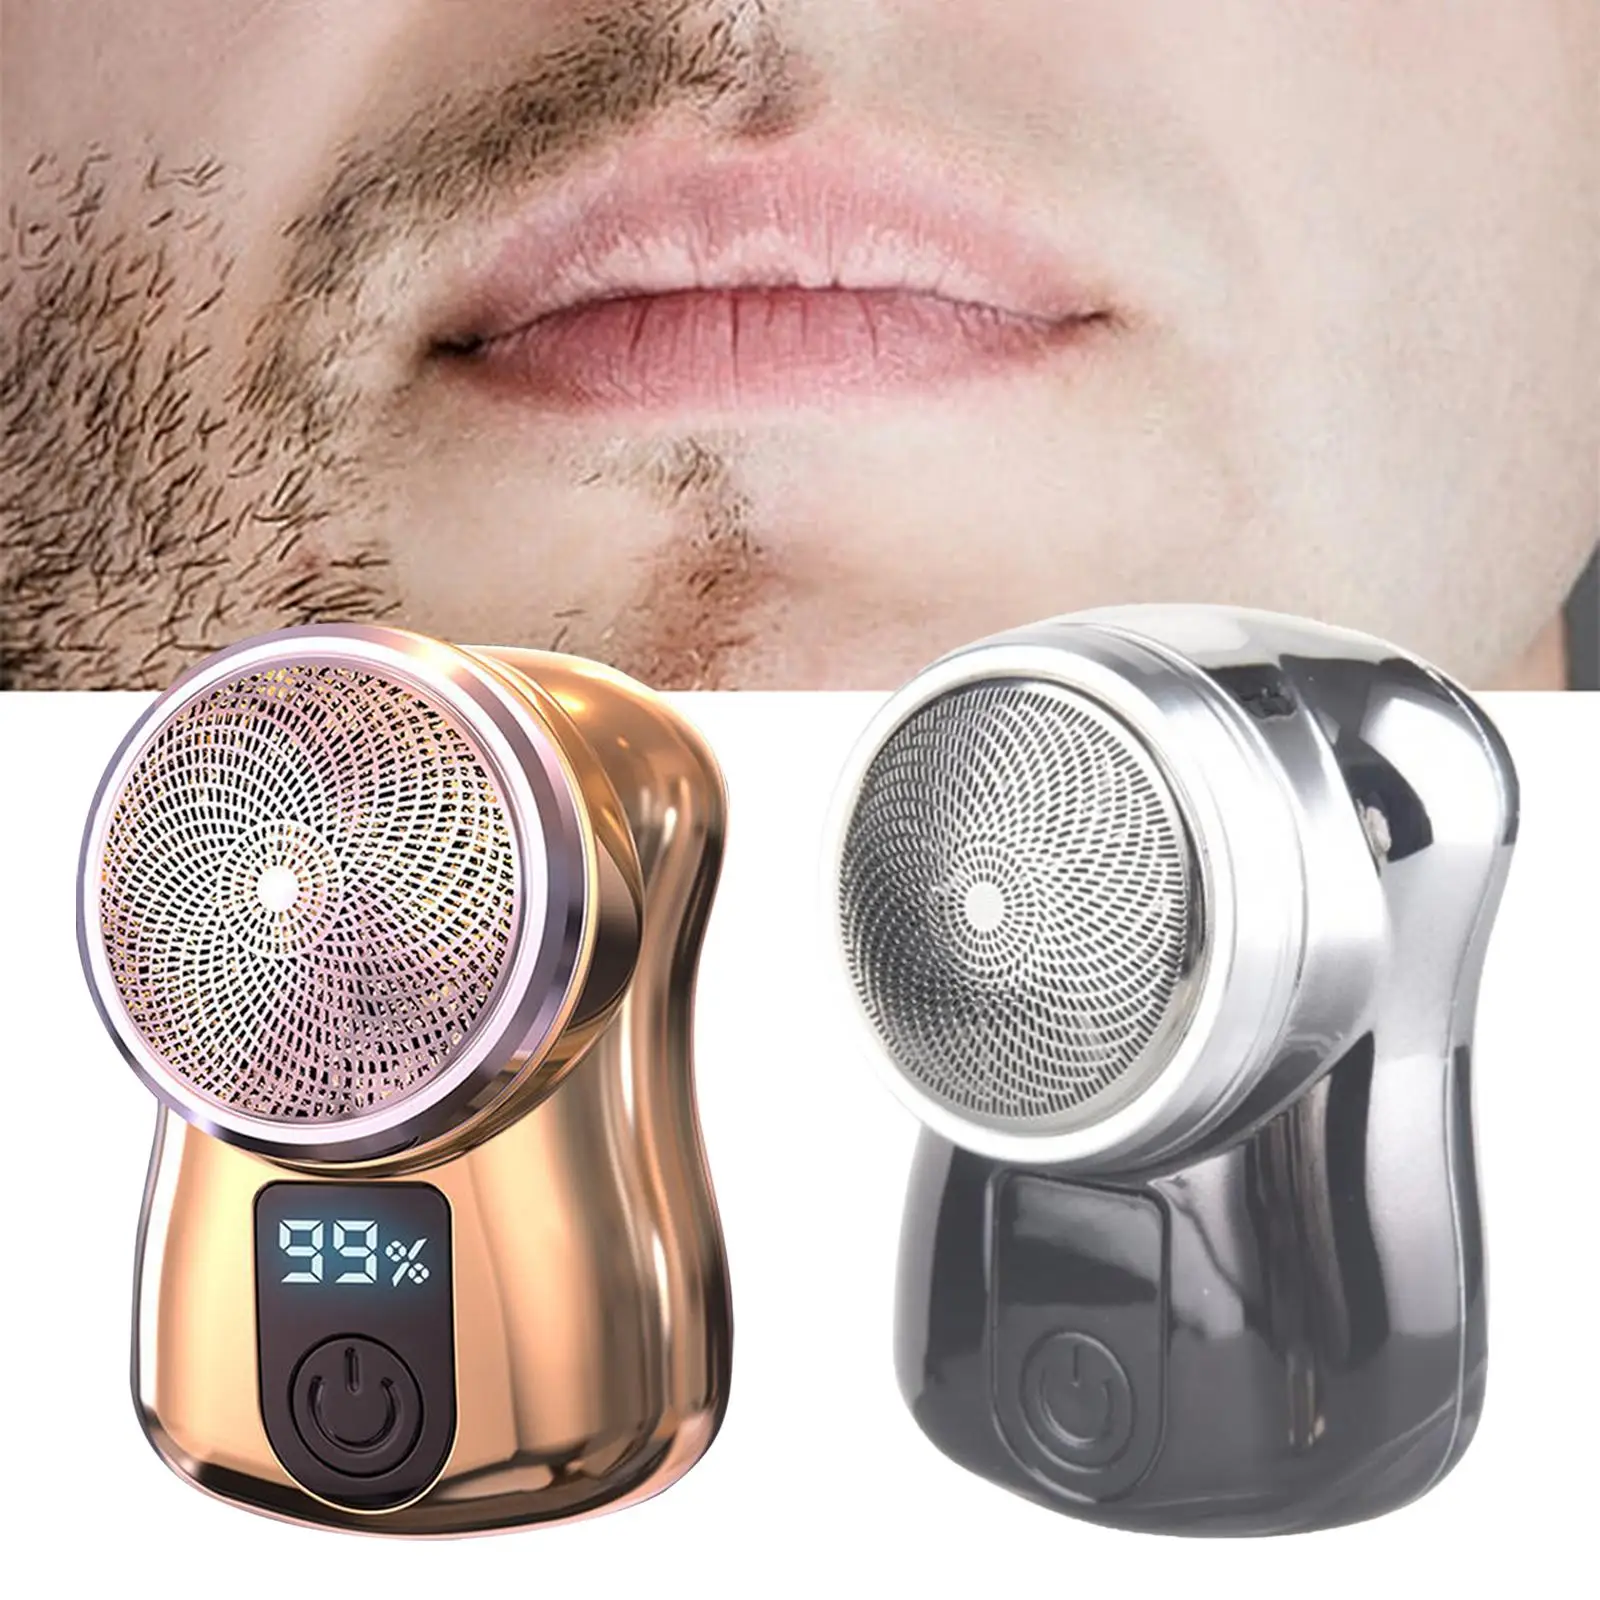 Mini Shaver Father`s Day Gifts Cordless Professional Removable and Washable Head Pocket Size Digital Display Beard Razor Trimmer